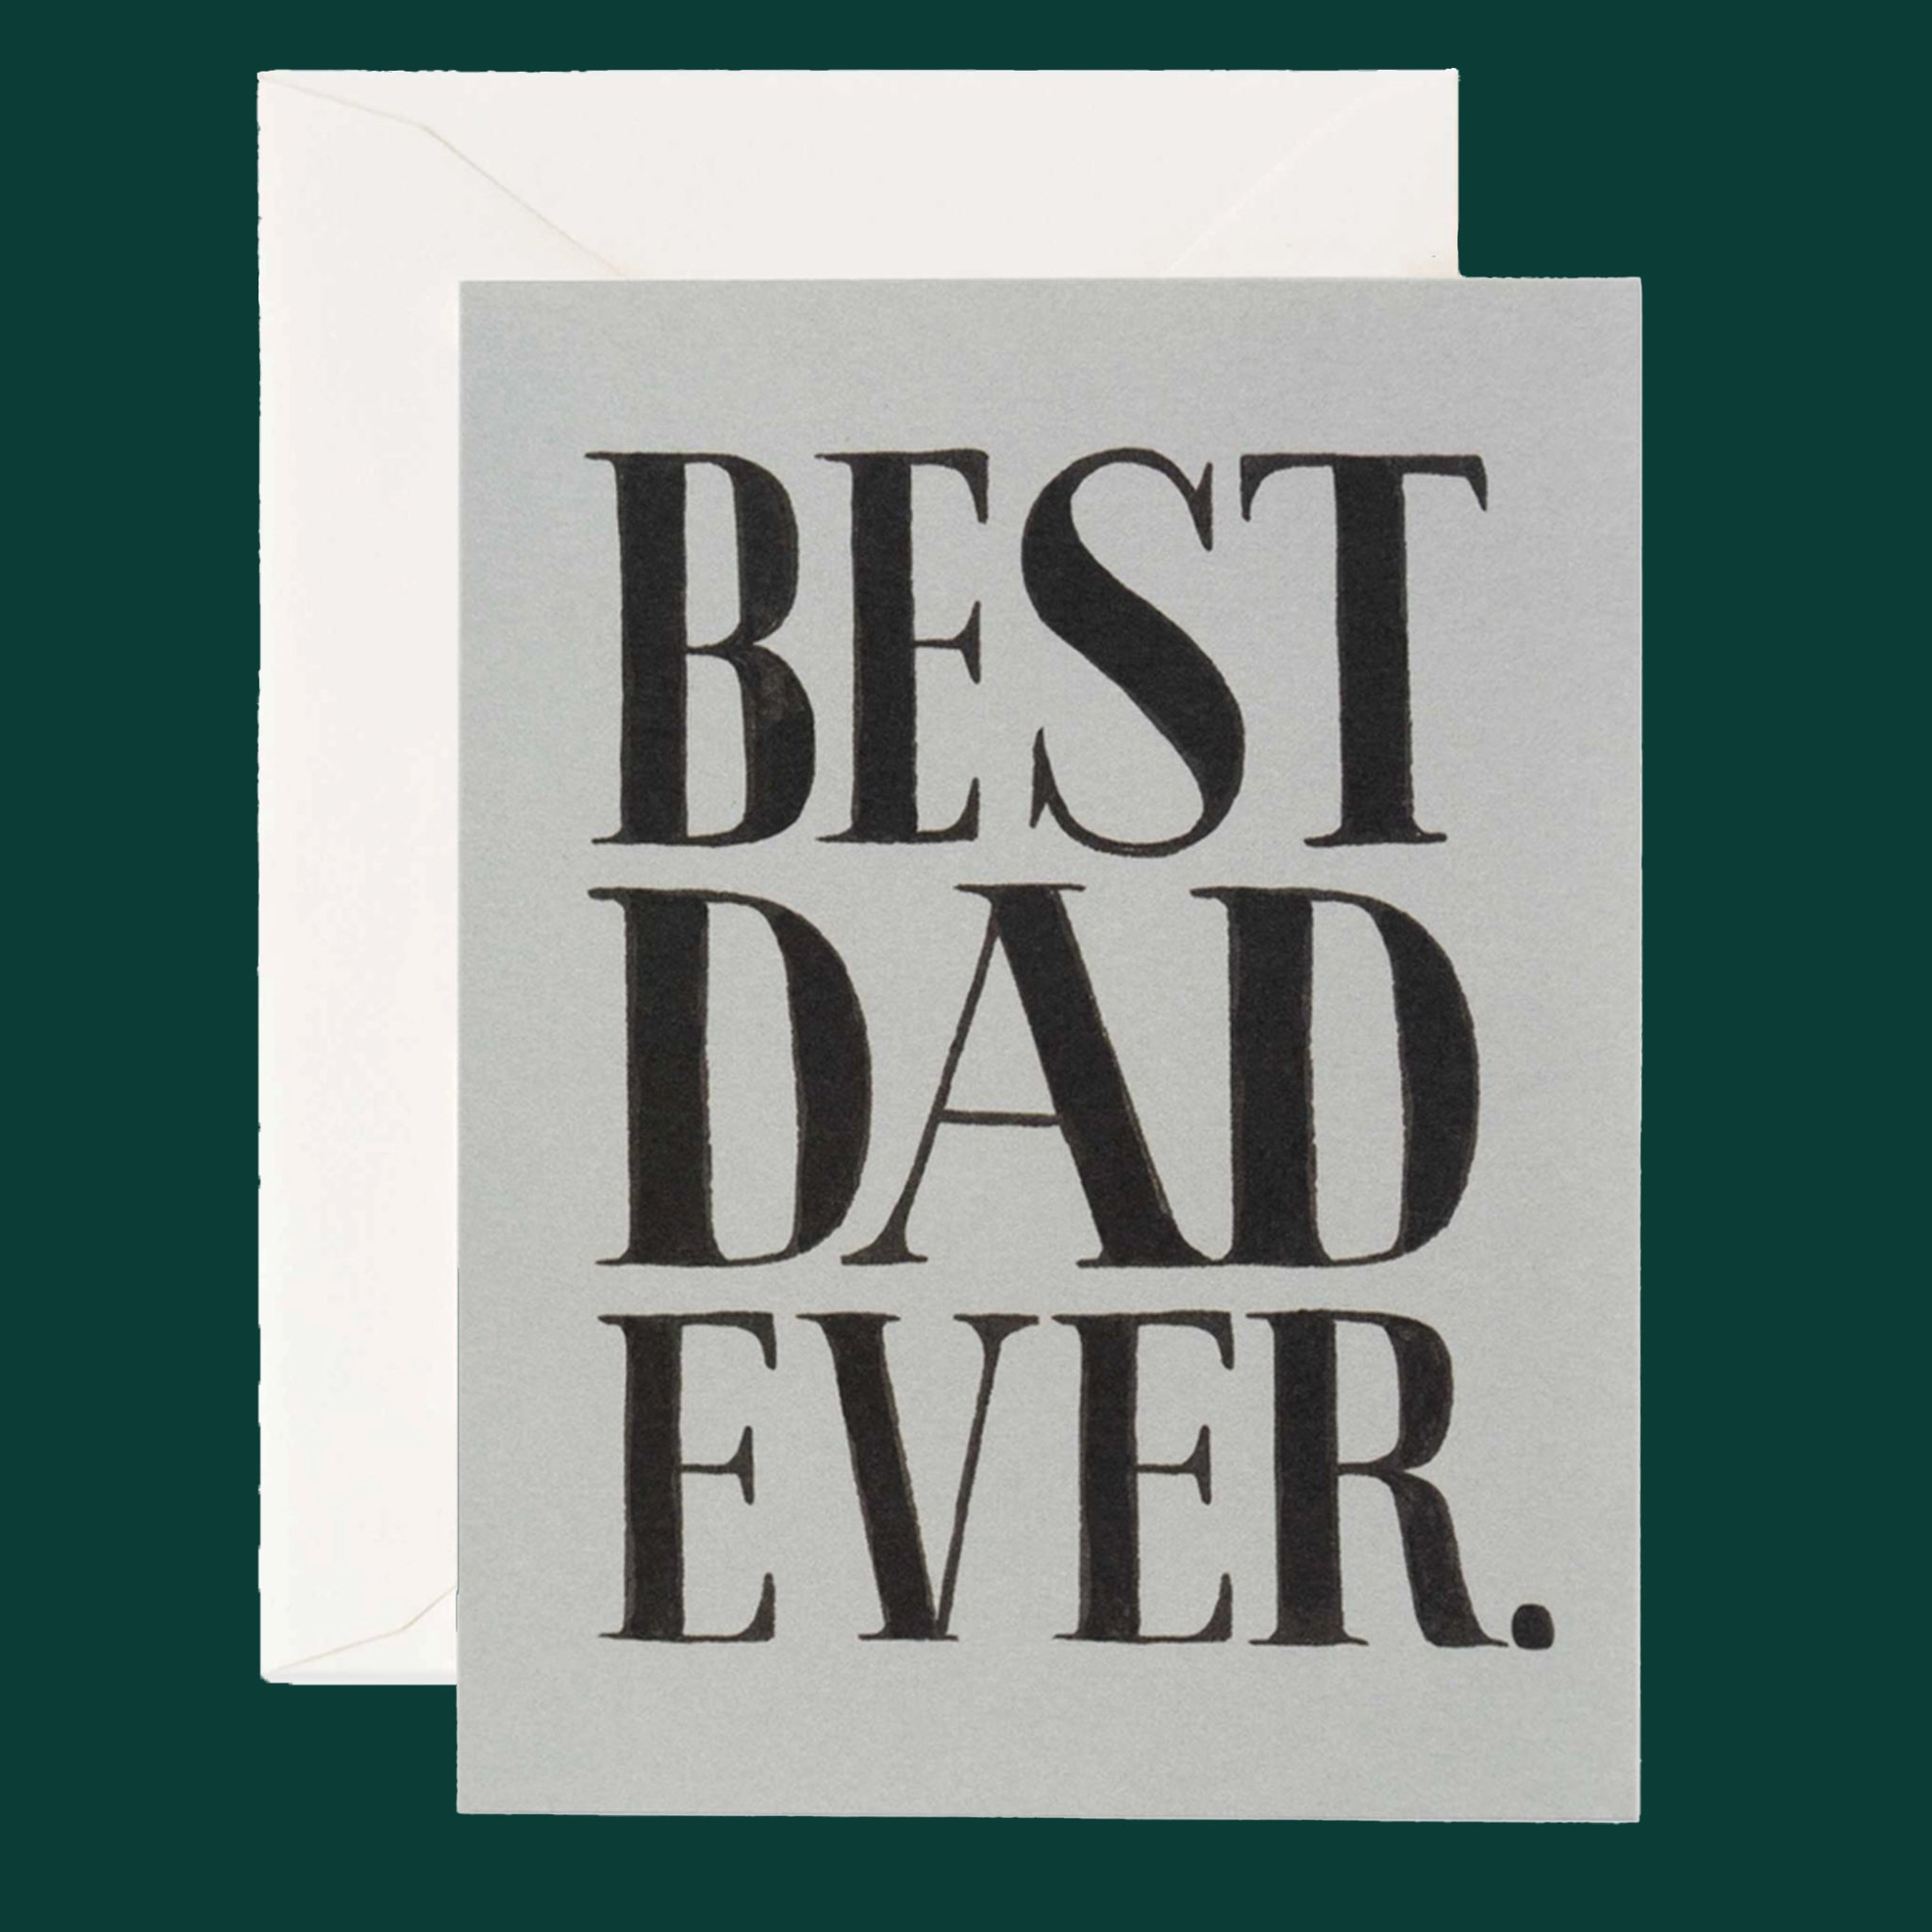 Grey greeting card with white envelope with large text covering the whole card, "BEST DAD EVER."